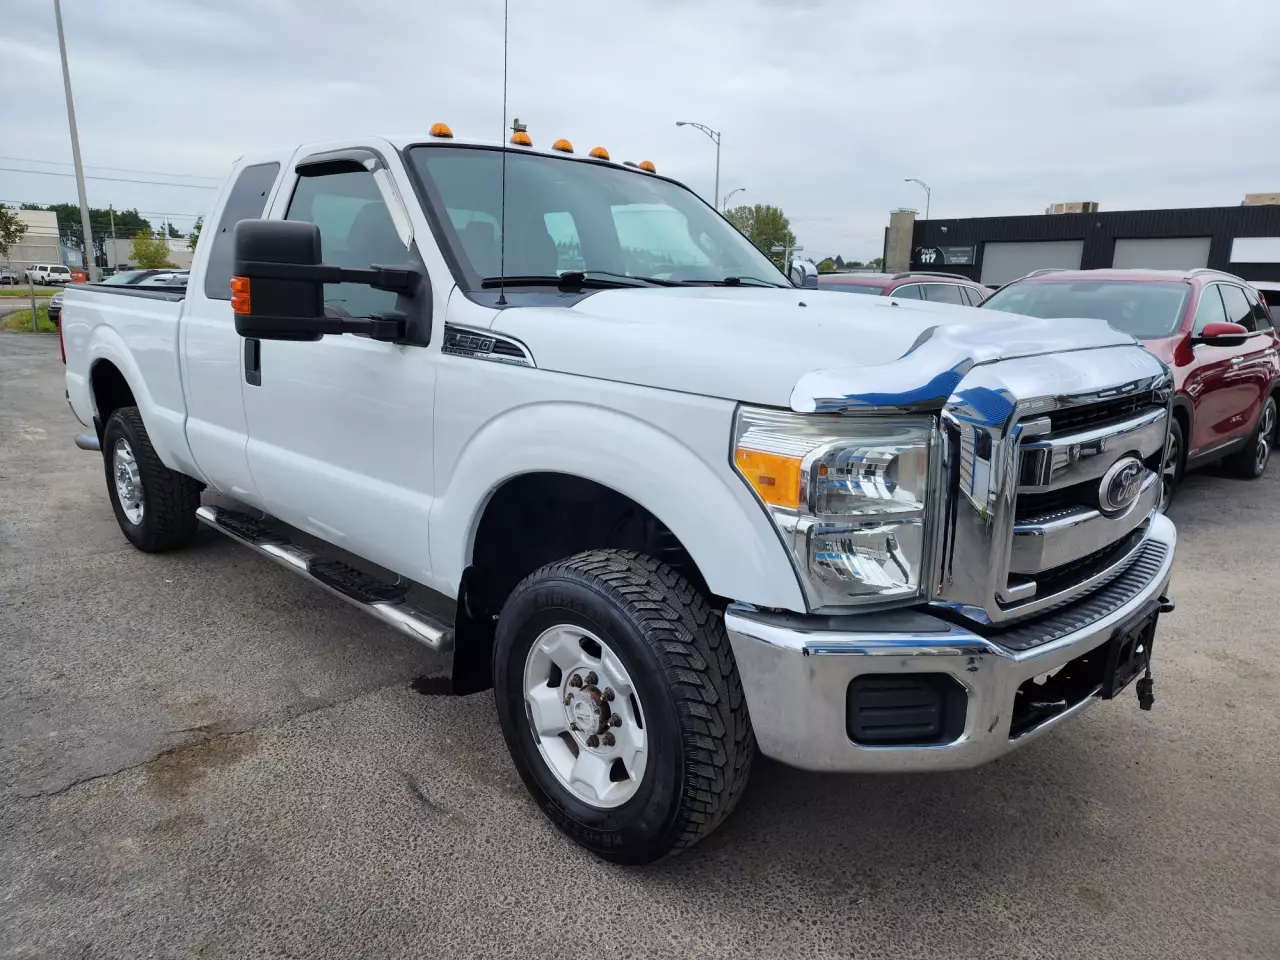 2011 FORD F-250 SD